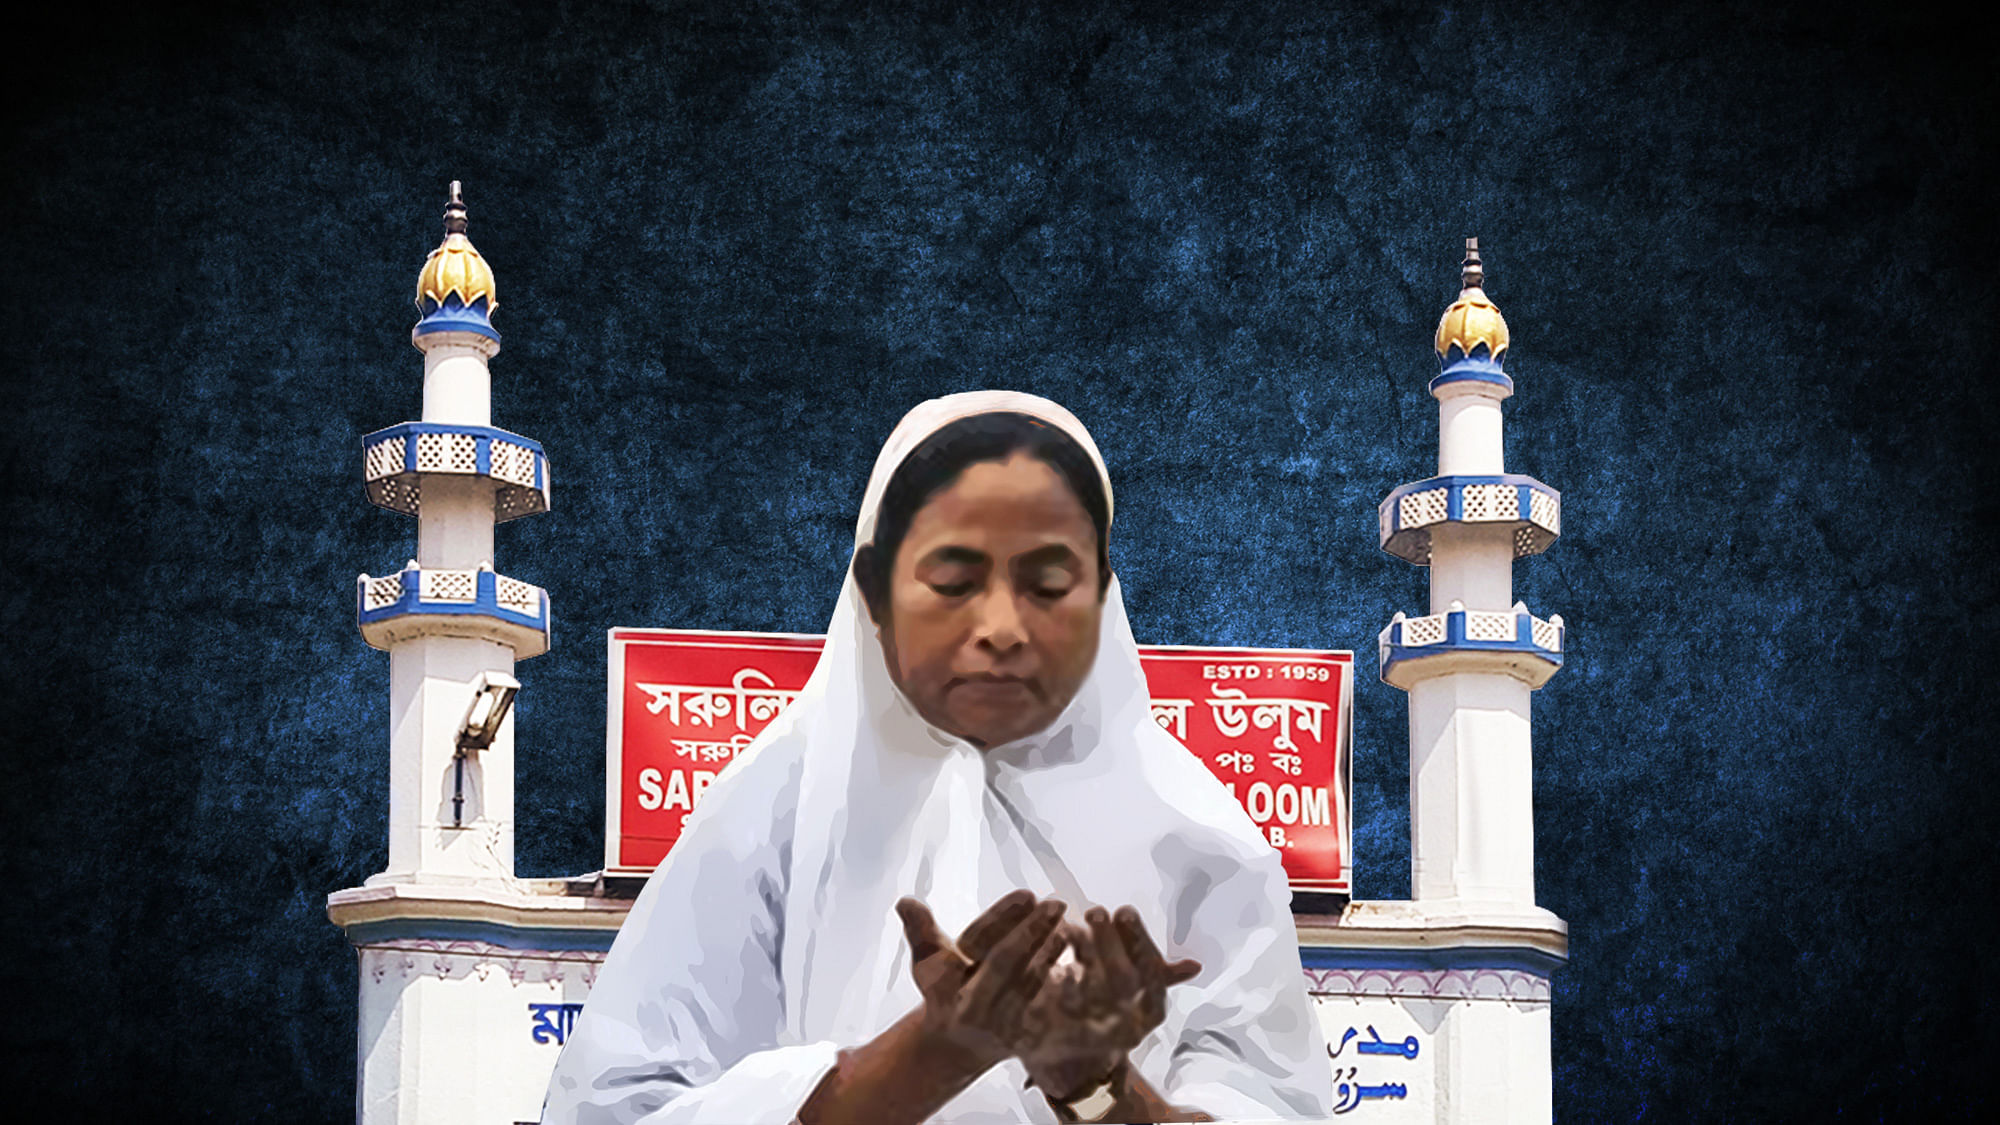 Mamata’s diktat on Muharram smacks of age old divide and rule policy.